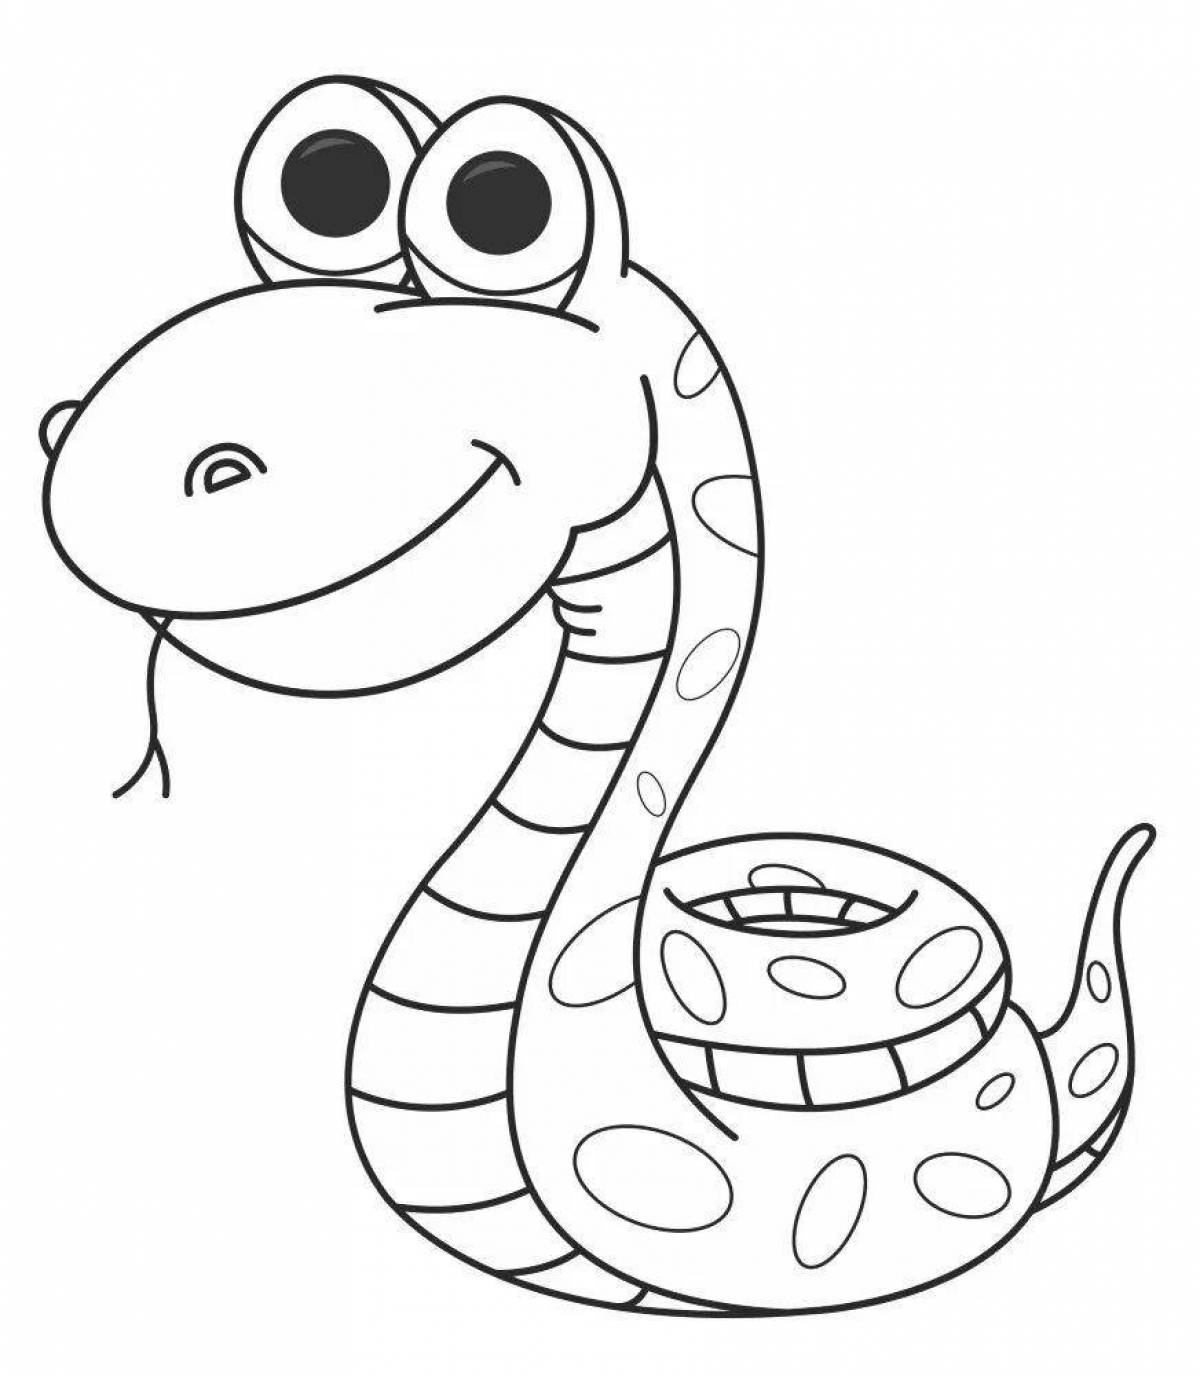 Coloring bright snake